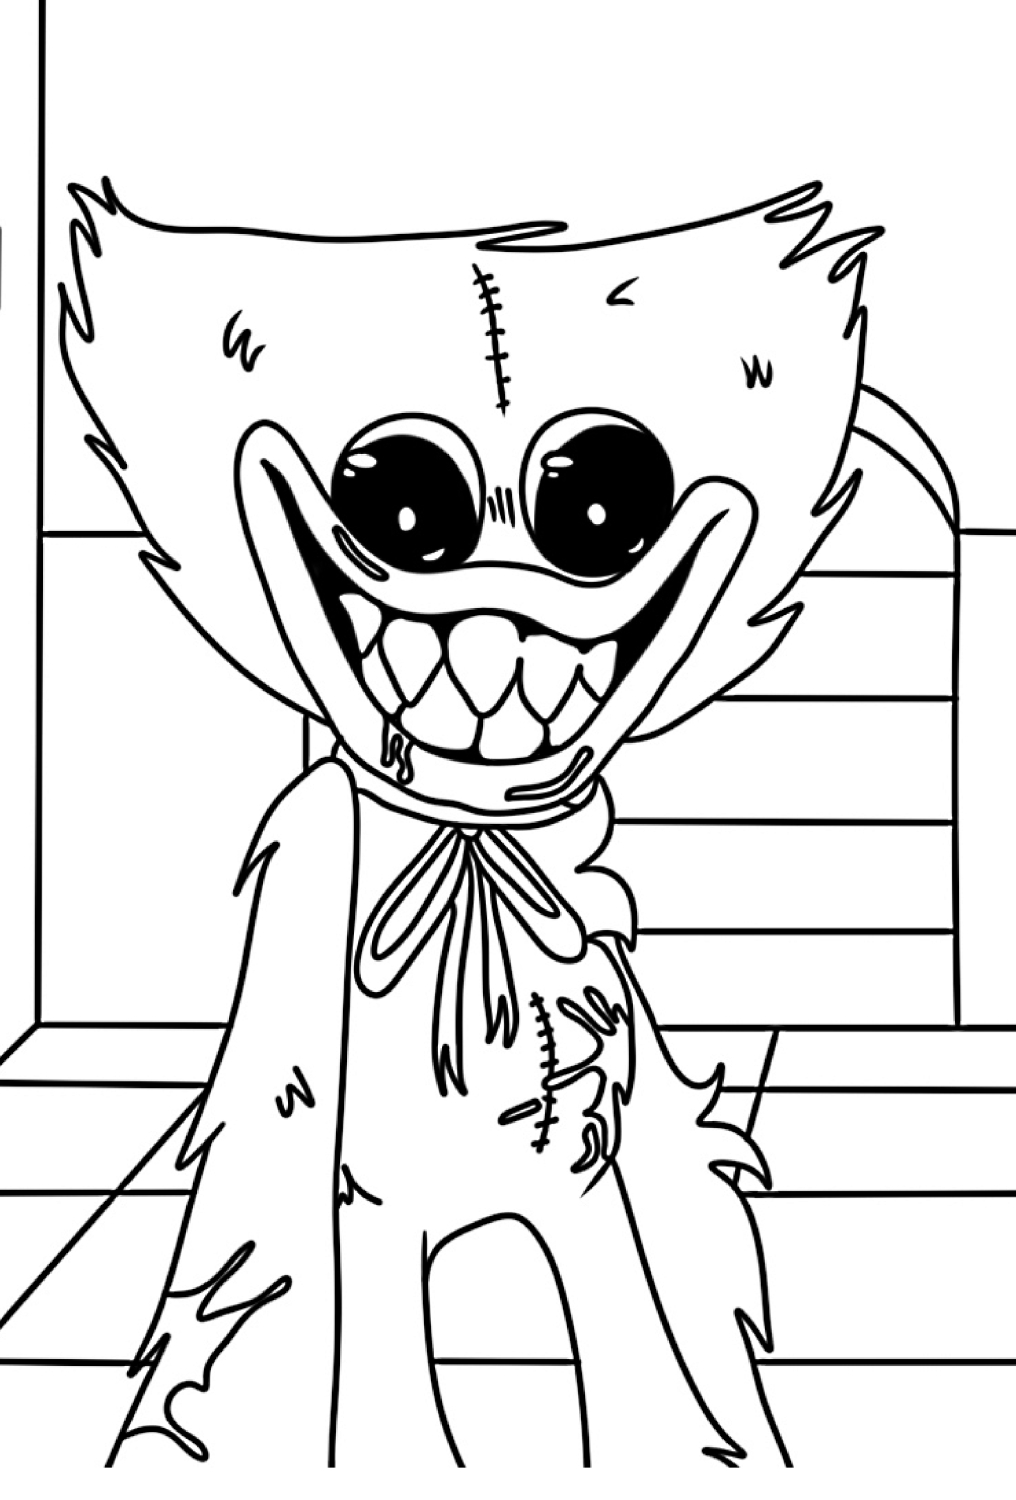 Huggy Wuggy 08  coloring page to print and coloring